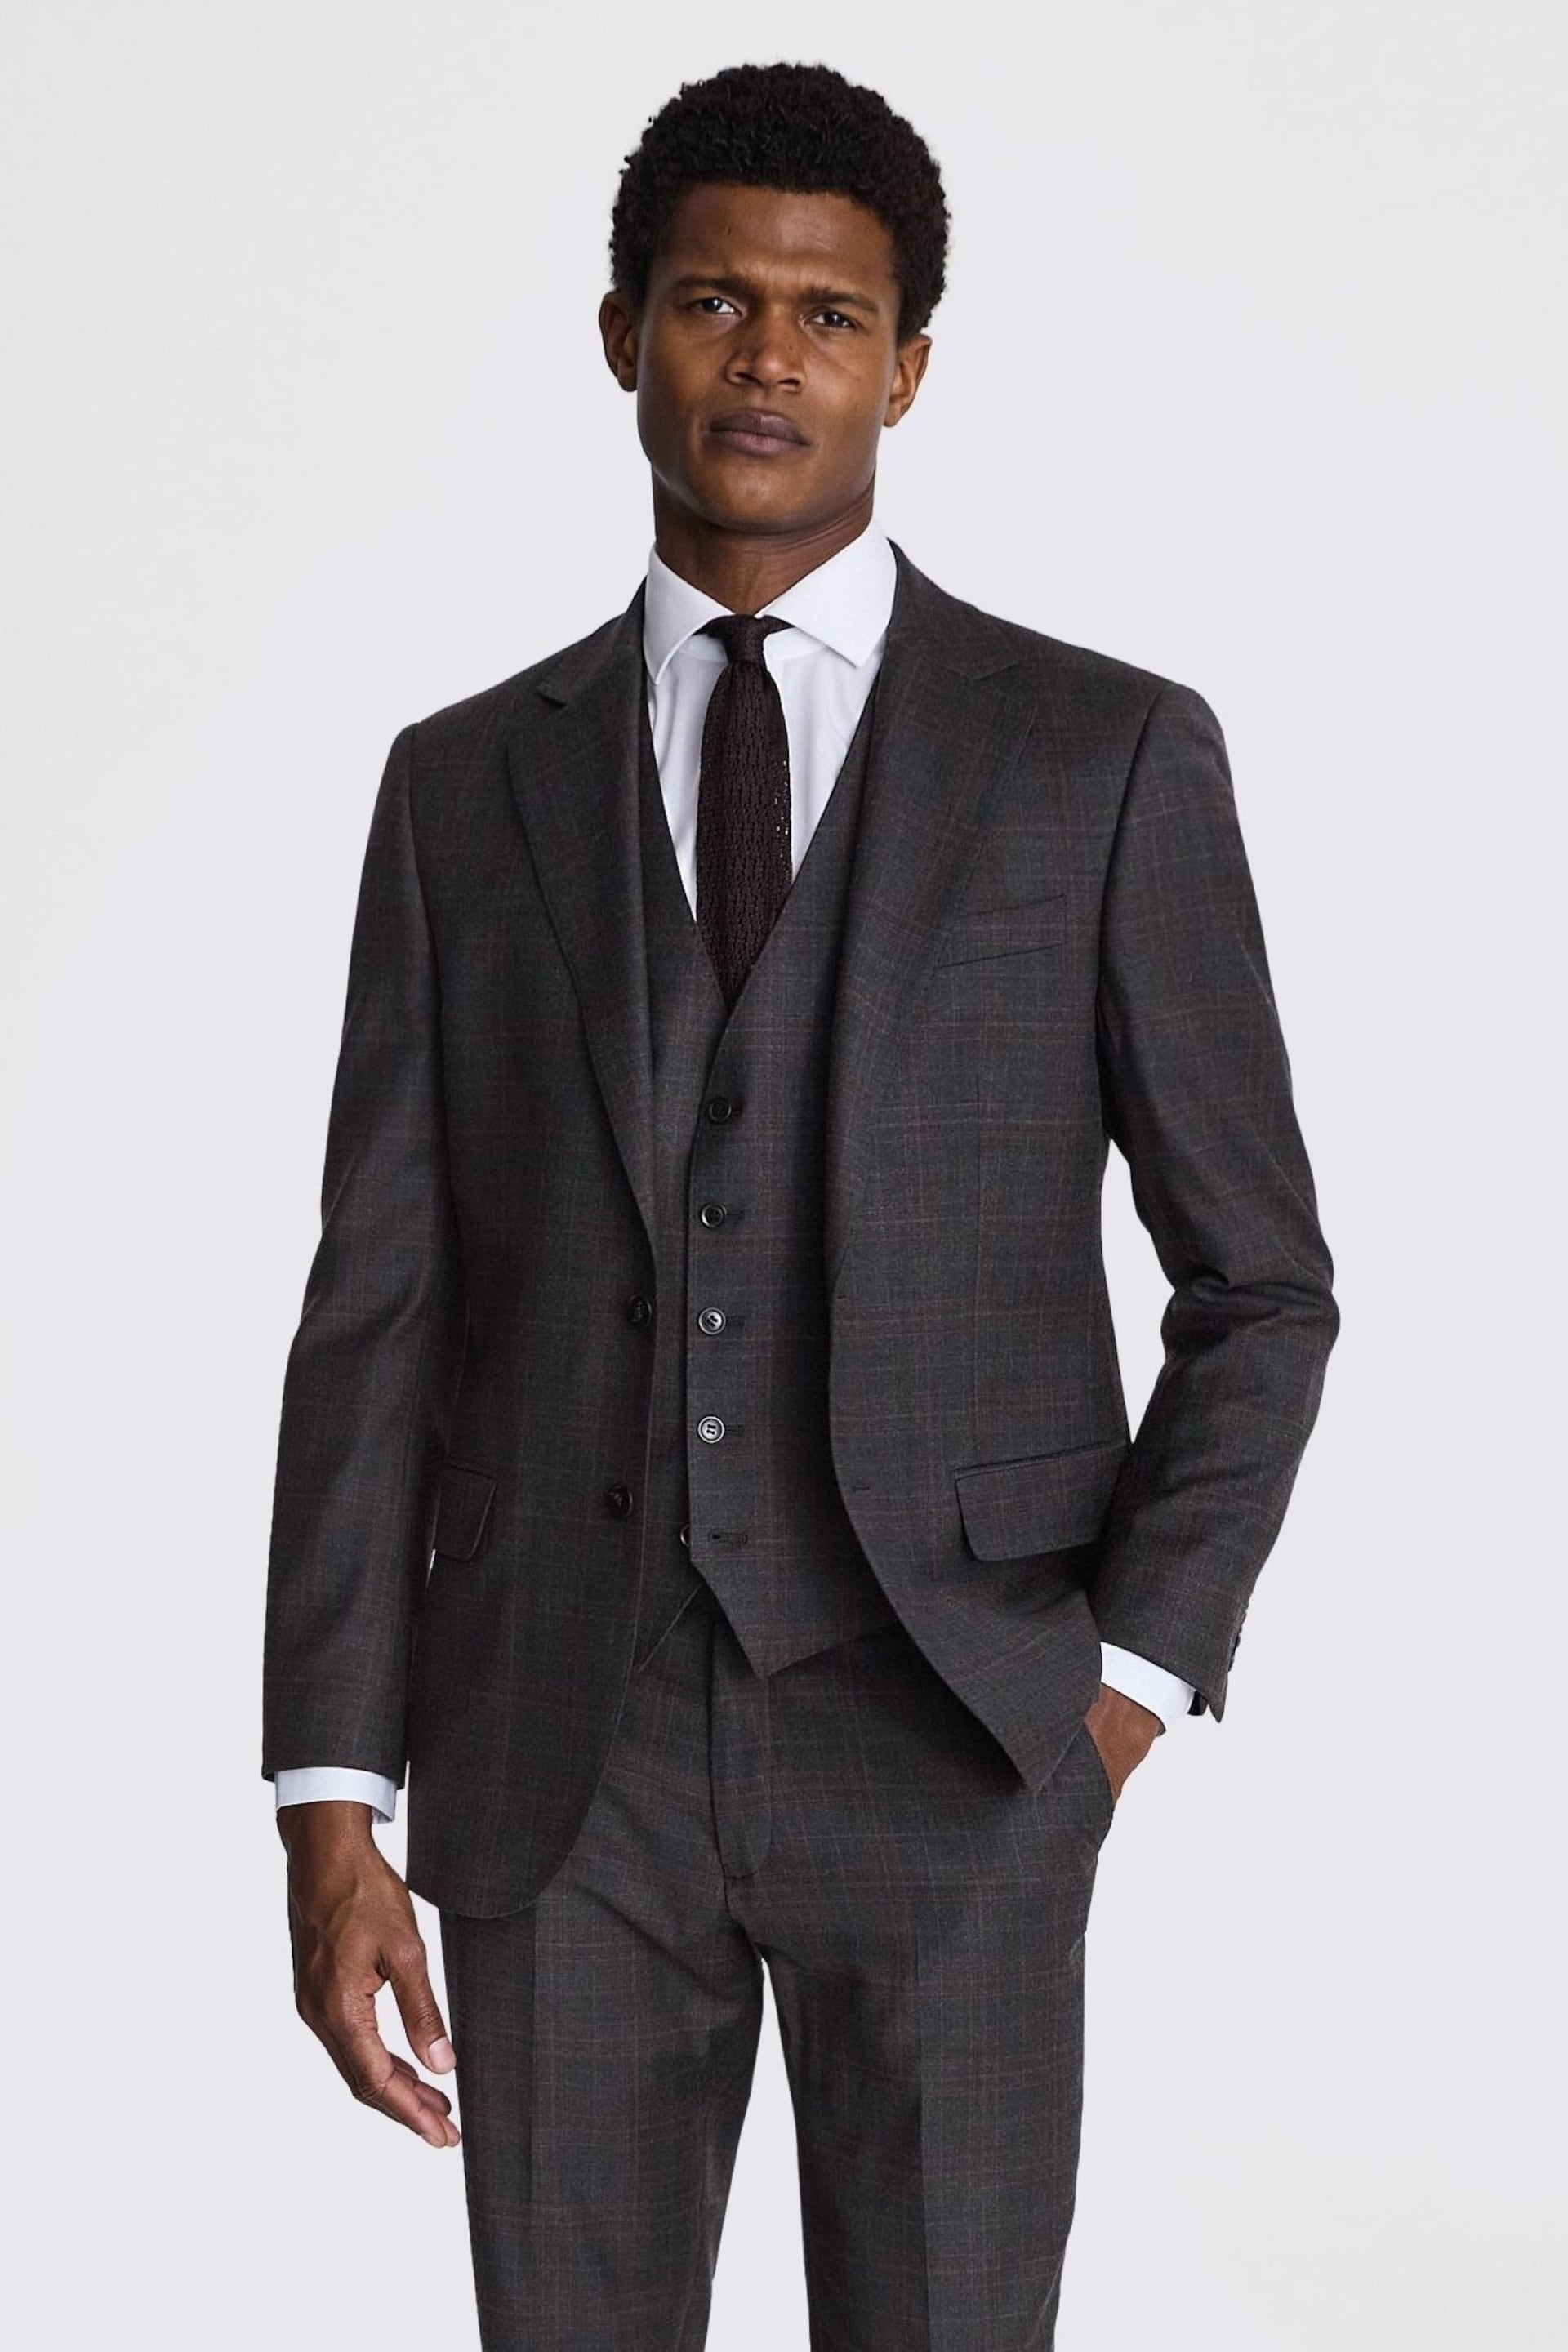 MOSS Grey Tailored Fit Wool Check Suit Jacket - Image 1 of 5